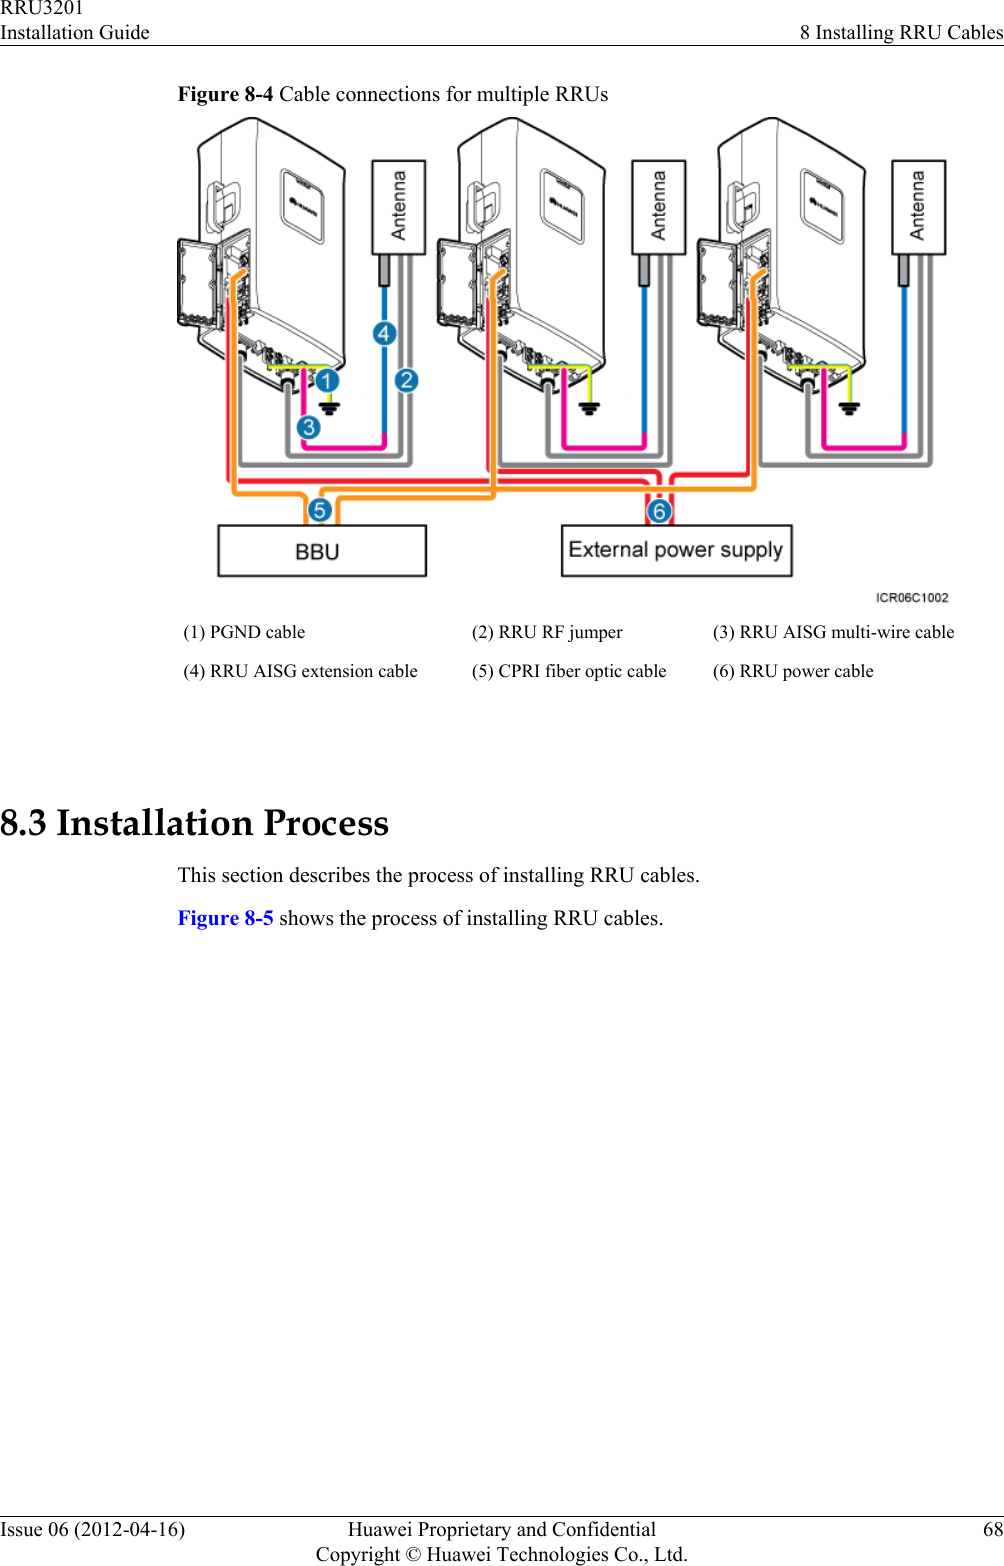 Figure 8-4 Cable connections for multiple RRUs(1) PGND cable (2) RRU RF jumper (3) RRU AISG multi-wire cable(4) RRU AISG extension cable (5) CPRI fiber optic cable (6) RRU power cable 8.3 Installation ProcessThis section describes the process of installing RRU cables.Figure 8-5 shows the process of installing RRU cables.RRU3201Installation Guide 8 Installing RRU CablesIssue 06 (2012-04-16) Huawei Proprietary and ConfidentialCopyright © Huawei Technologies Co., Ltd.68